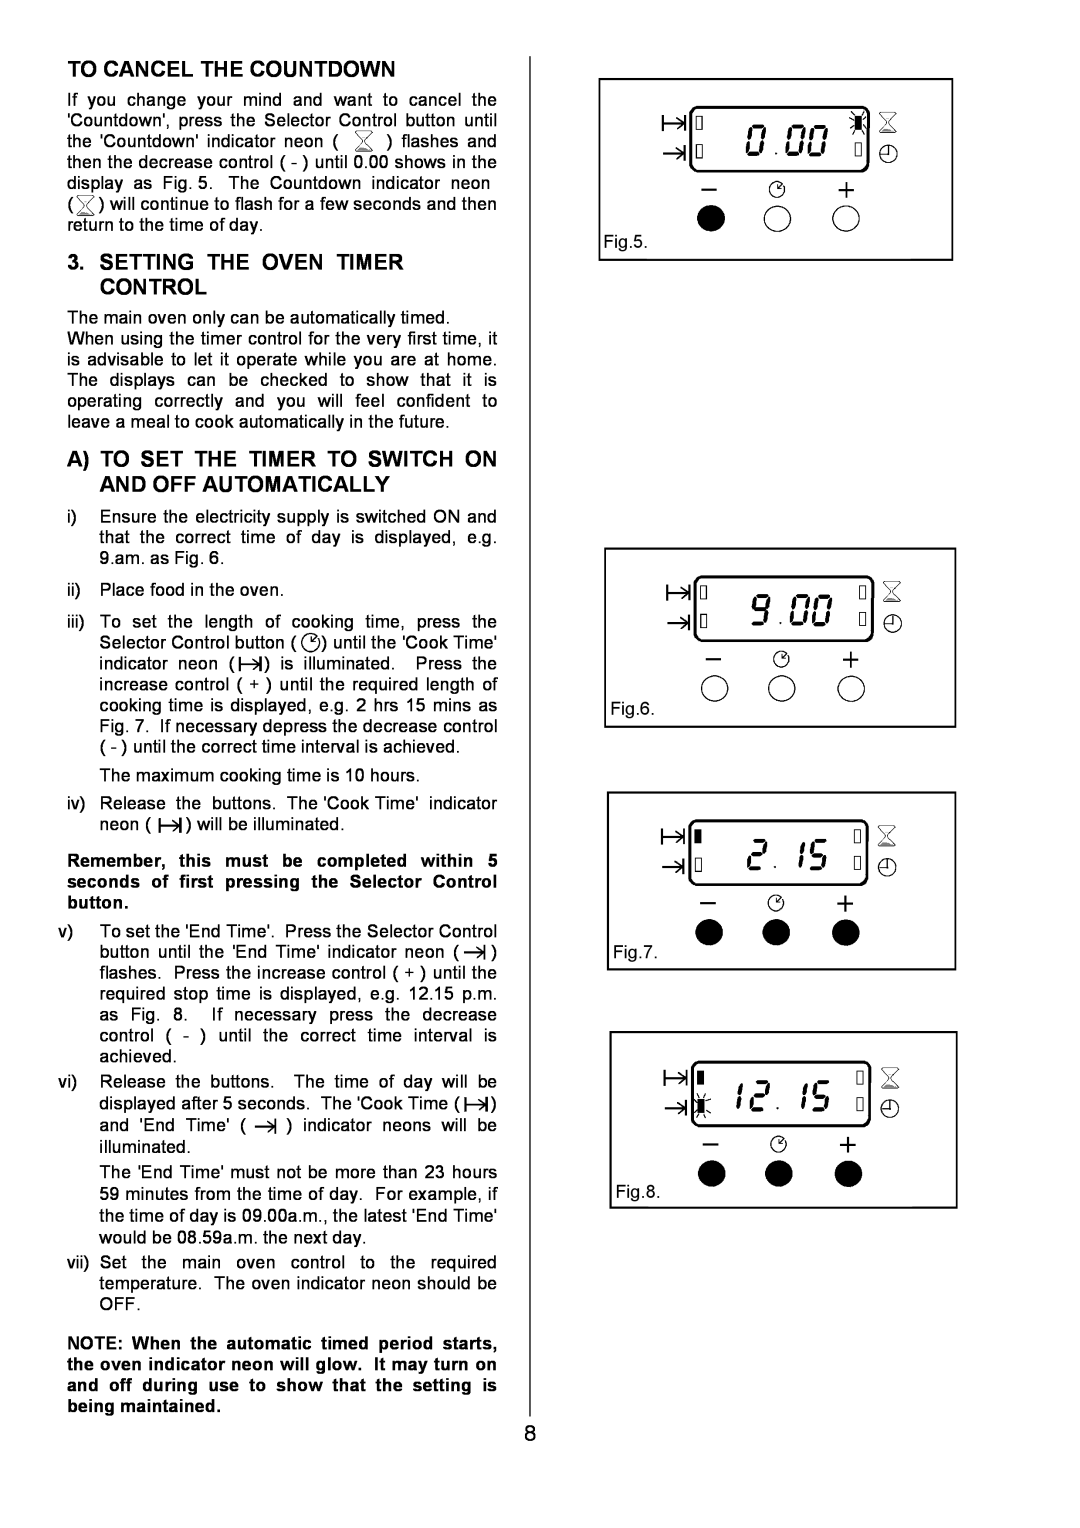 Zanussi ZCE 7680, ZCE 7690 manual To Cancel The Countdown, Setting The Oven Timer Control 